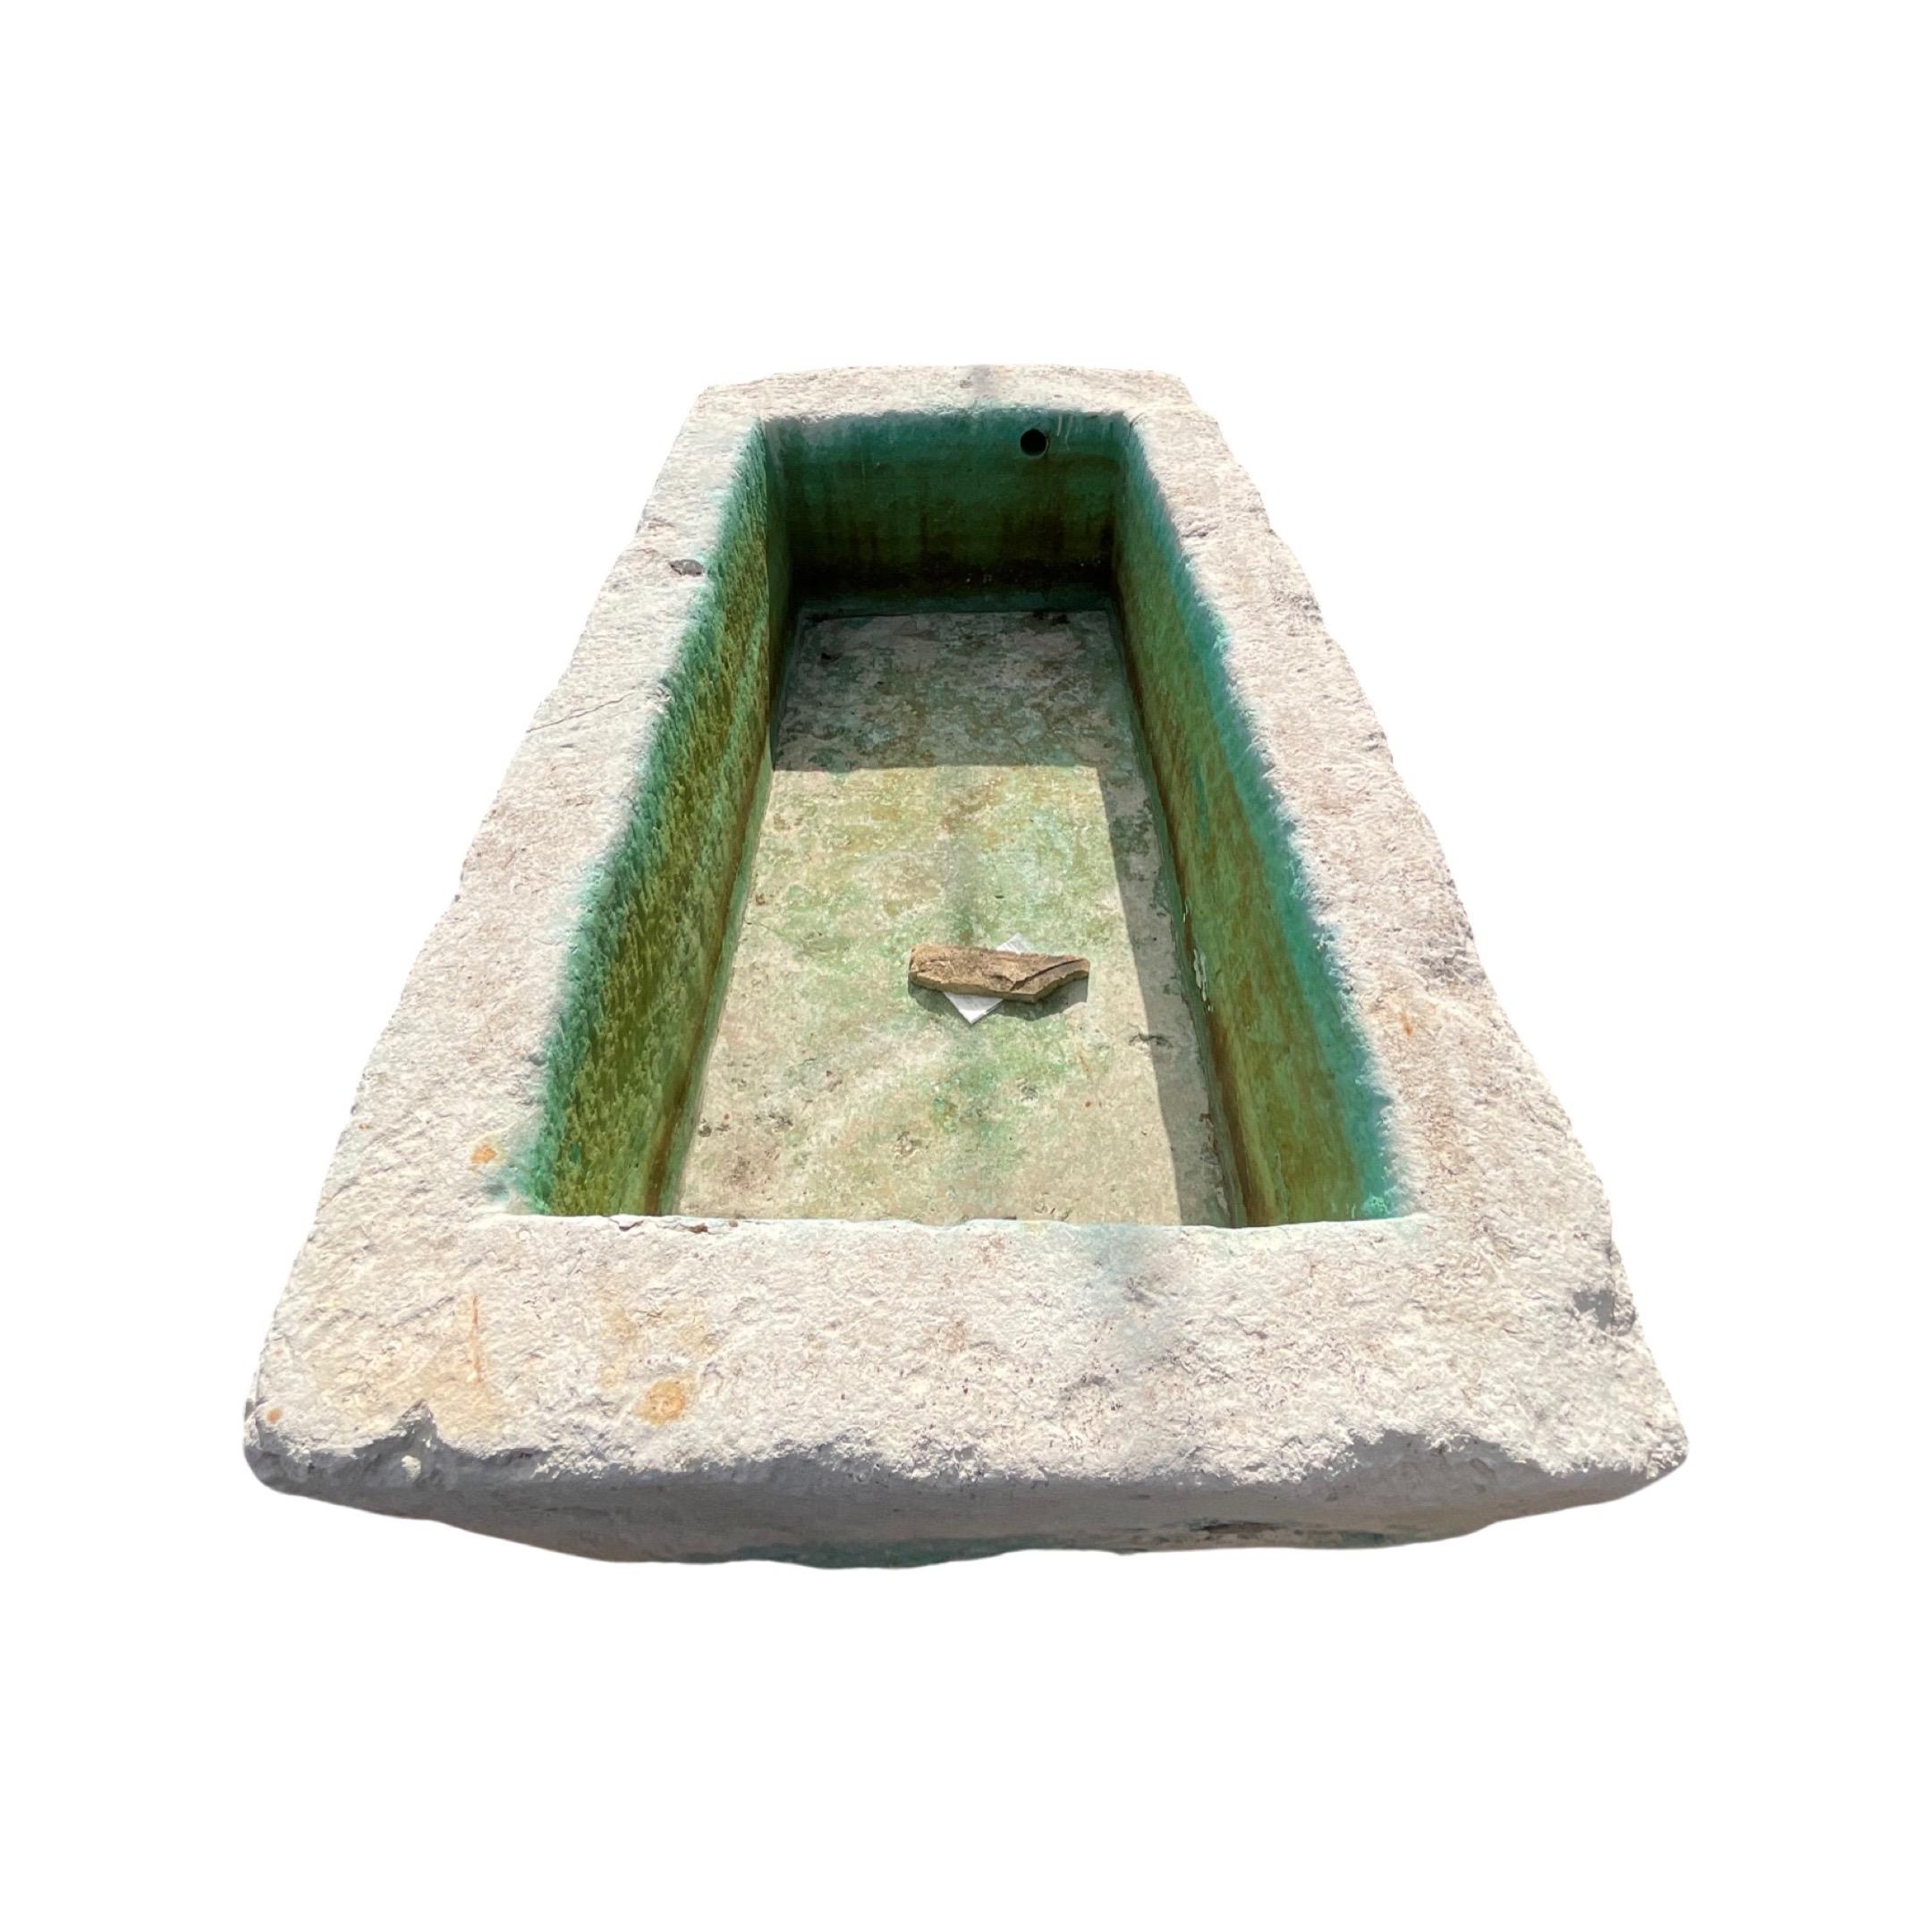 This French limestone trough is the perfect accent for any outdoor area. Expertly sourced from France, this trough is made with strong, durable limestone that is sure to last. Its unique design and natural finish add character and beauty to any